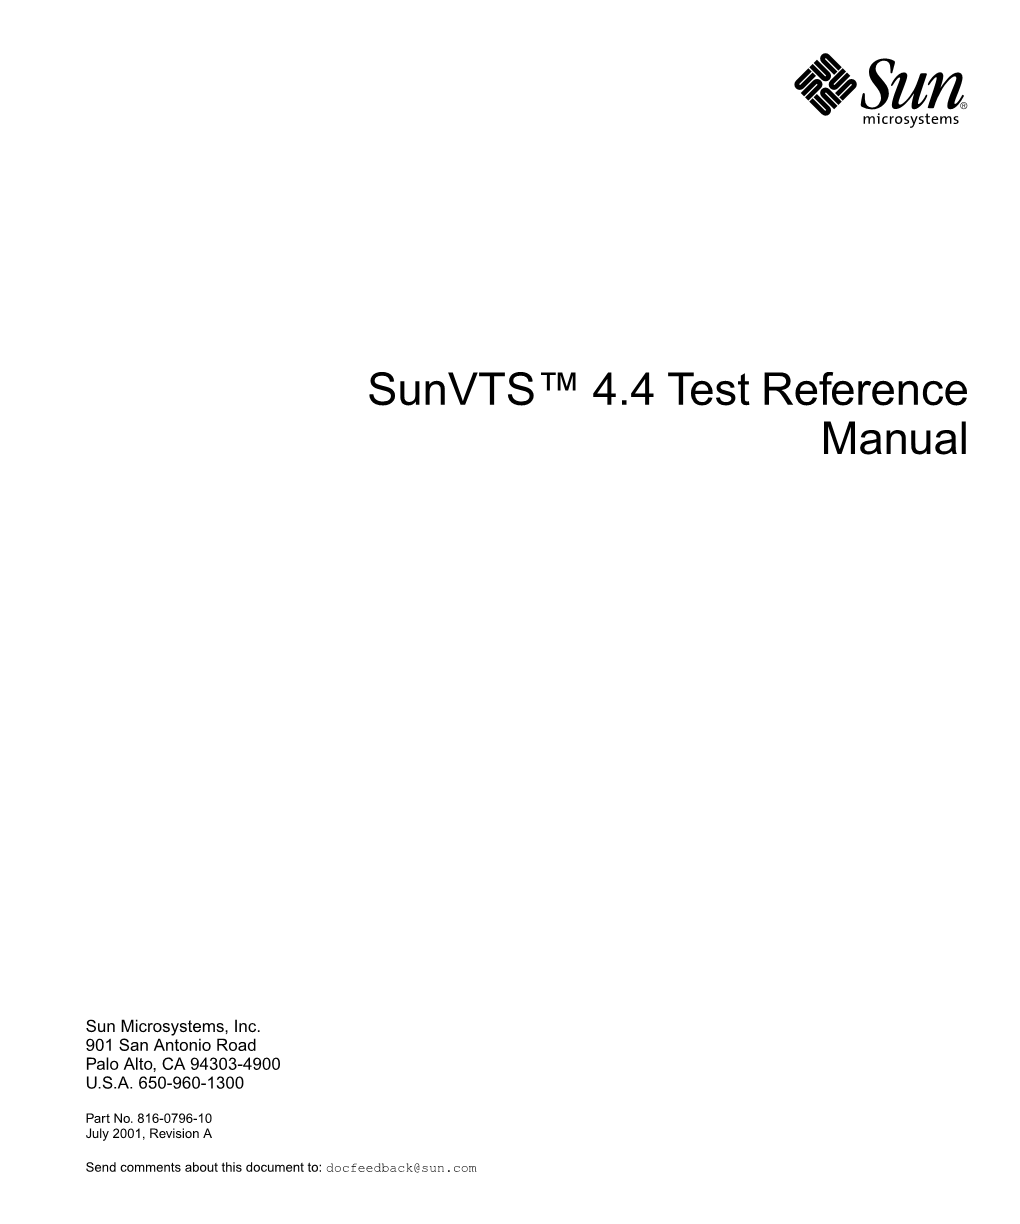 Sunvts 4.4 Test Reference Manual • July 2001 Cg14test Groups 56 Cg14test Options 62 Cg14test Test Modes 64 Cg14test Command-Line Syntax 64